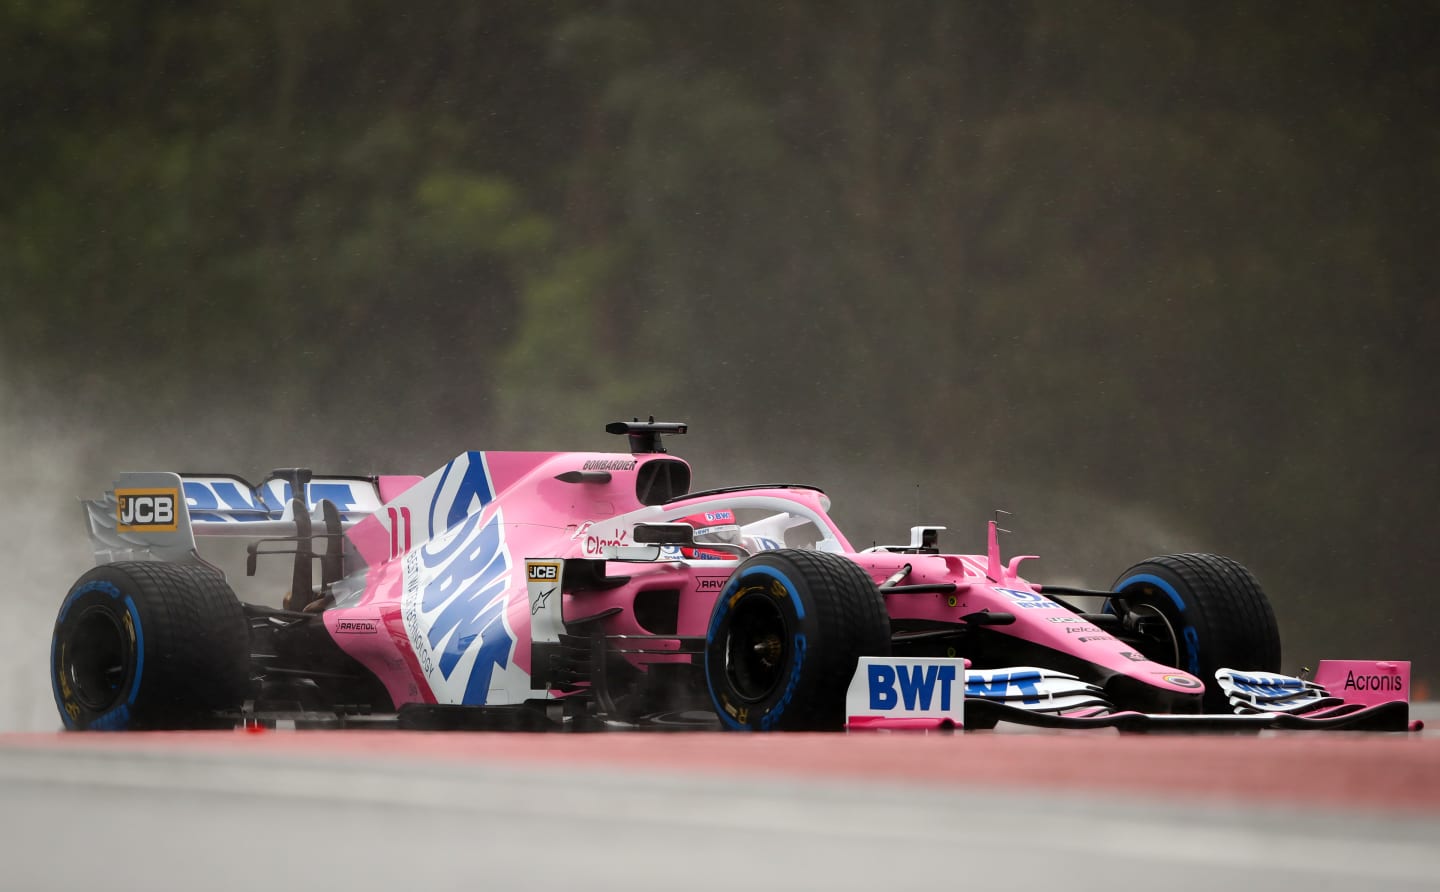 SPIELBERG, AUSTRIA - JULY 11: Sergio Perez of Mexico driving the (11) Racing Point RP20 Mercedes on track during qualifying for the Formula One Grand Prix of Styria at Red Bull Ring on July 11, 2020 in Spielberg, Austria. (Photo by Bryn Lennon/Getty Images)